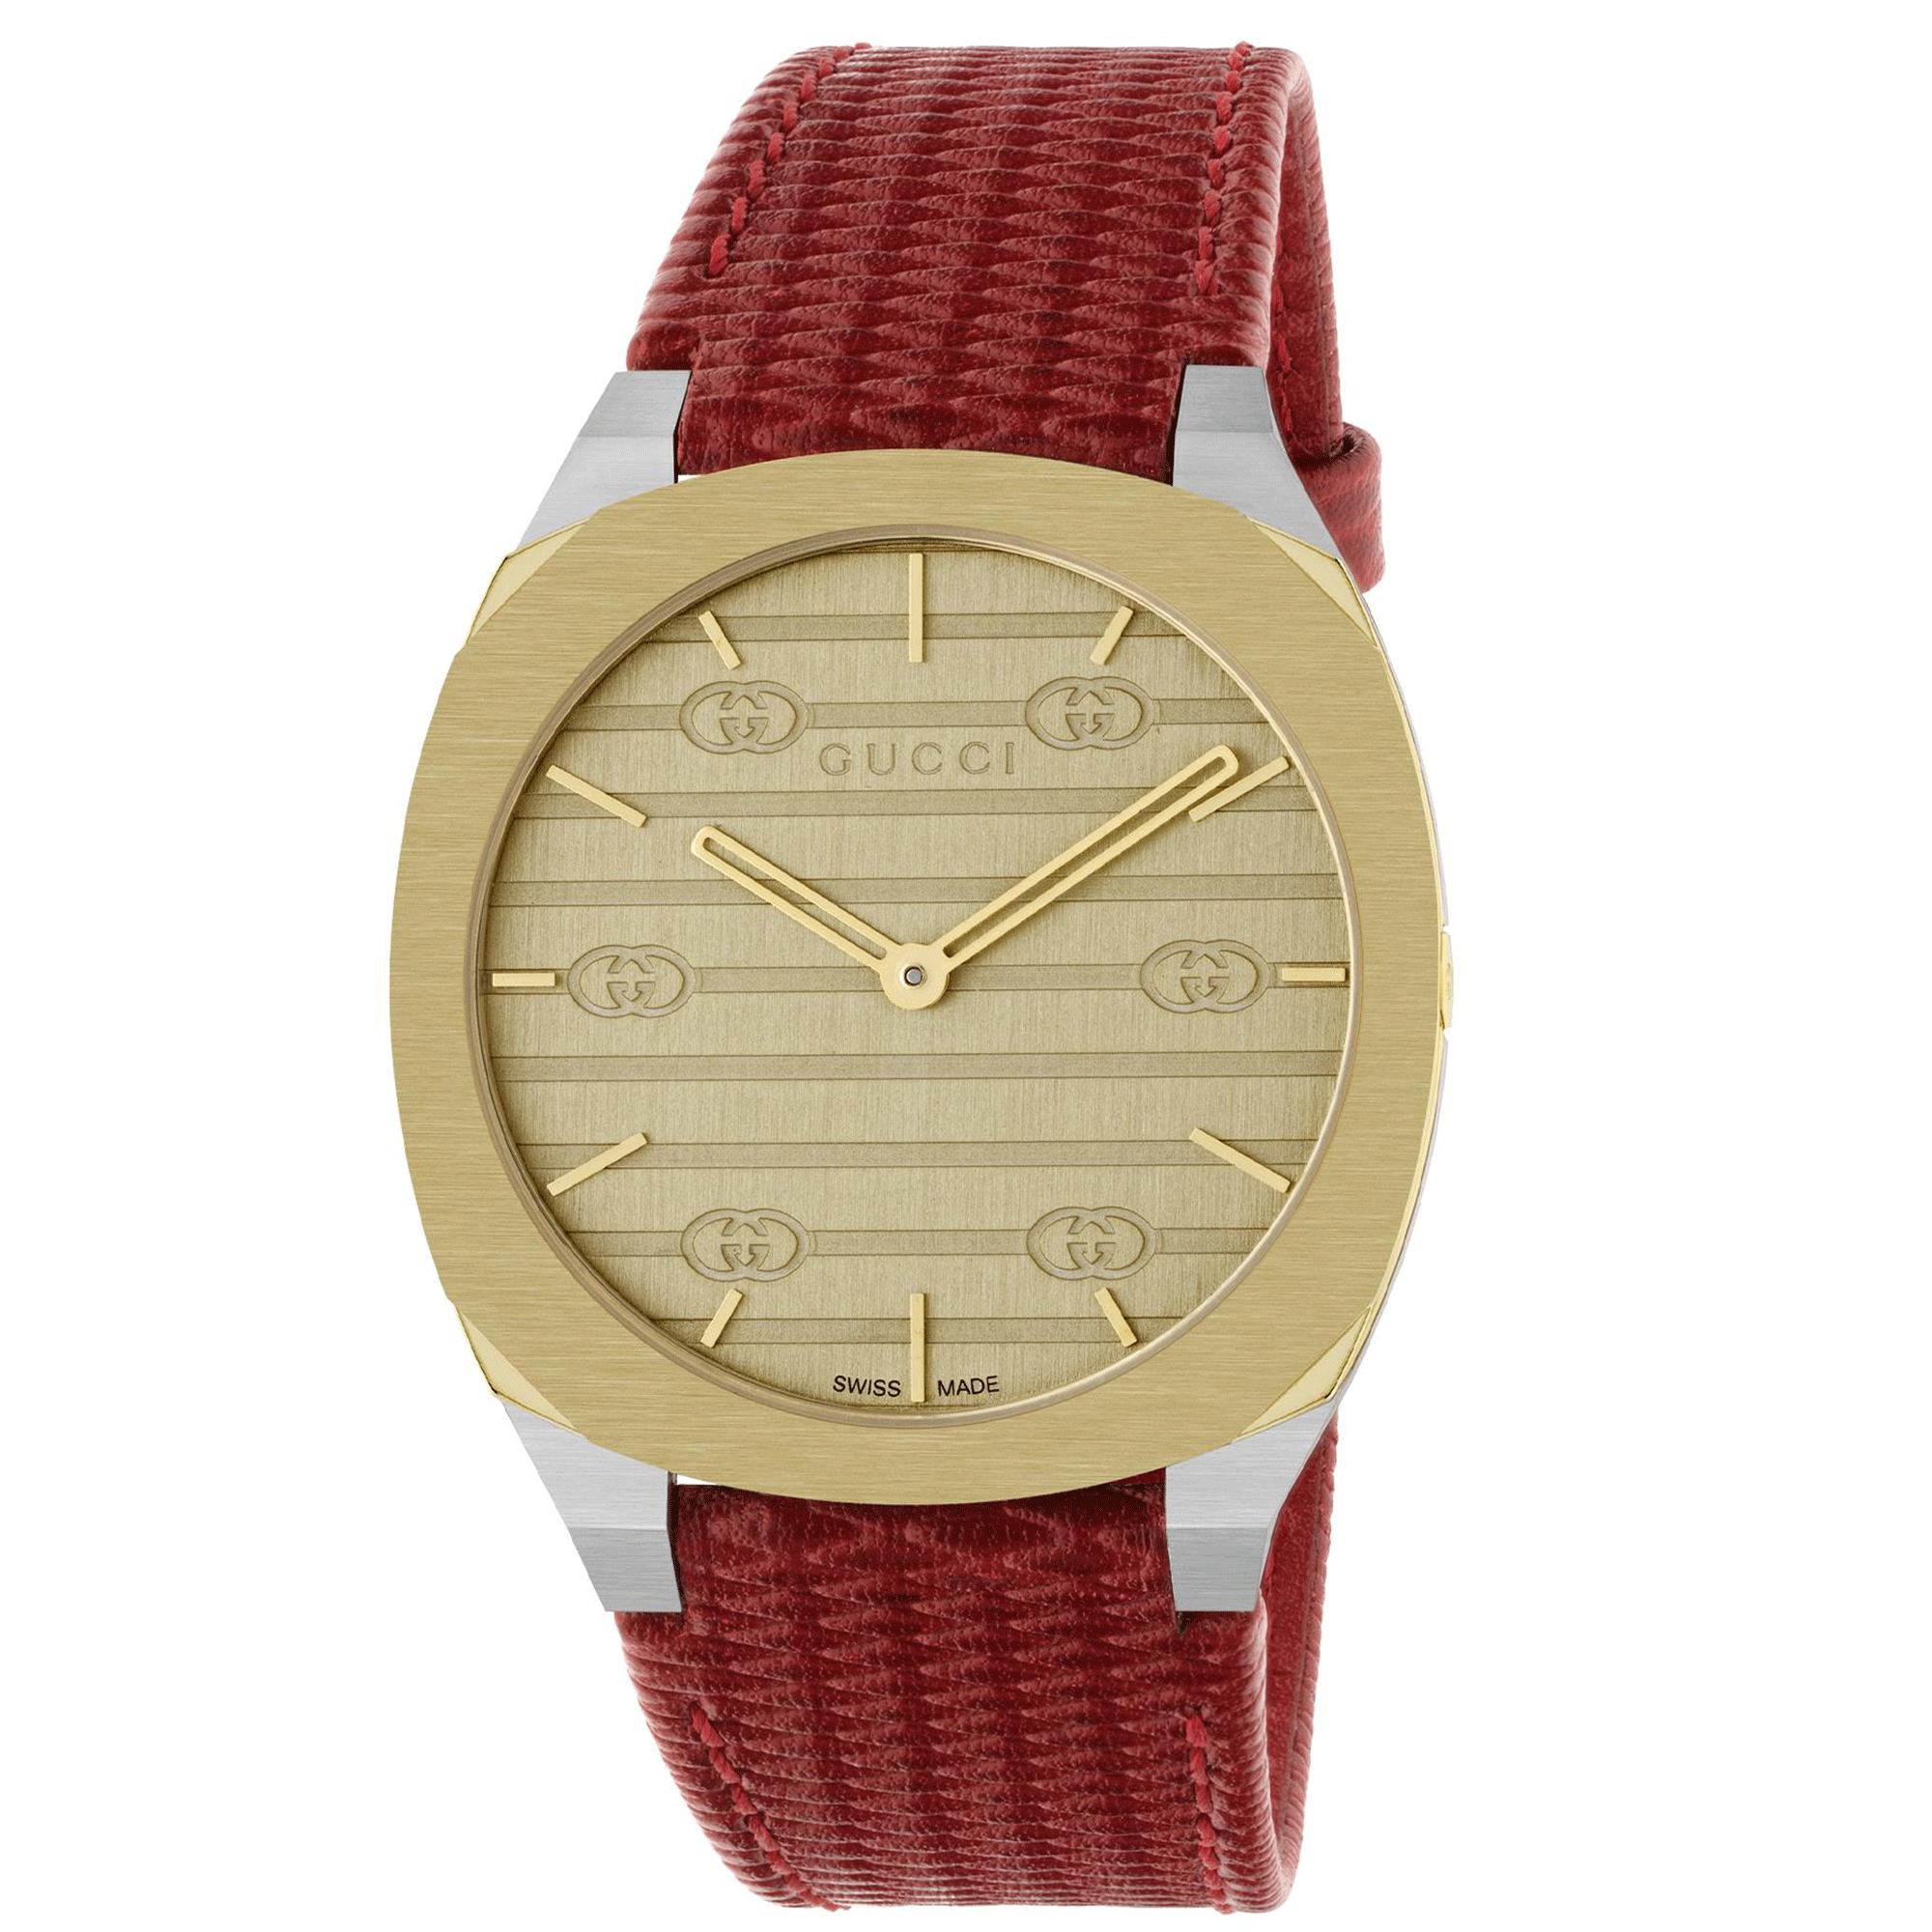 Gucci 25H 34mm Stainless Steel Red Leather Strap Watch With A Champagne Dial & Bezel